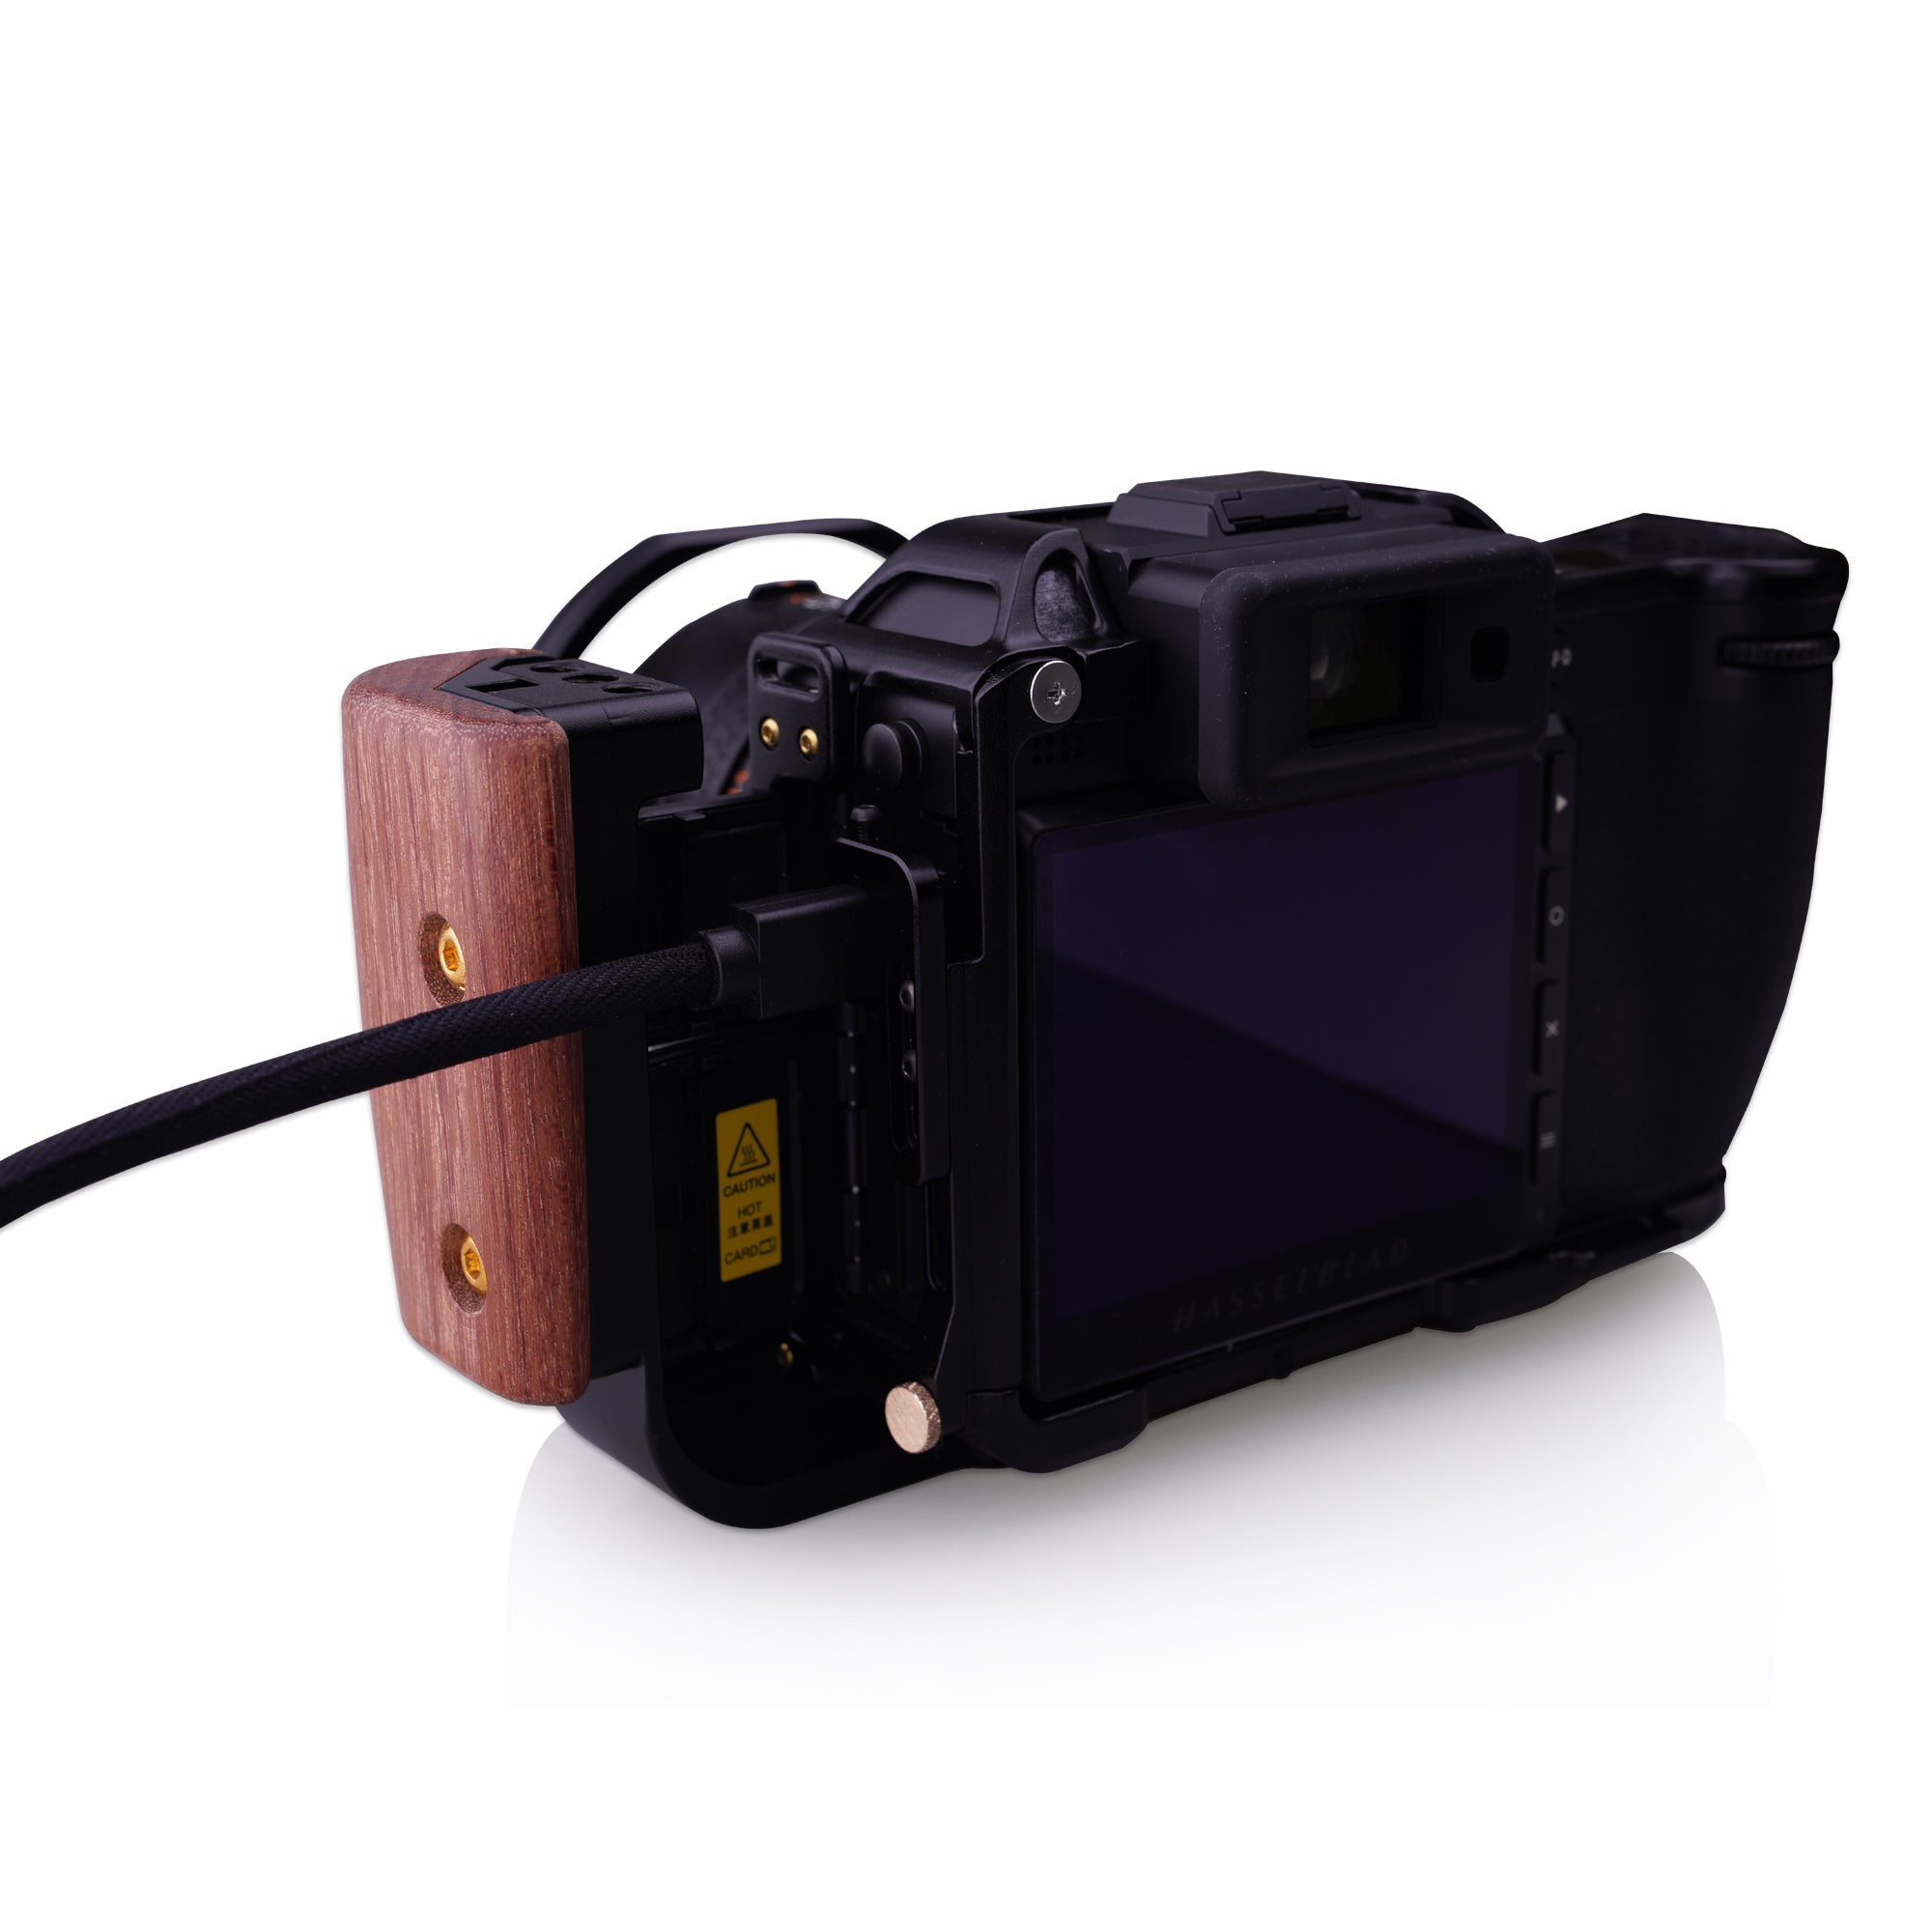 Lanhorse Modular Cage and Handgrip for Hasselblad X2D 100C, Lens Protector Frame Options.